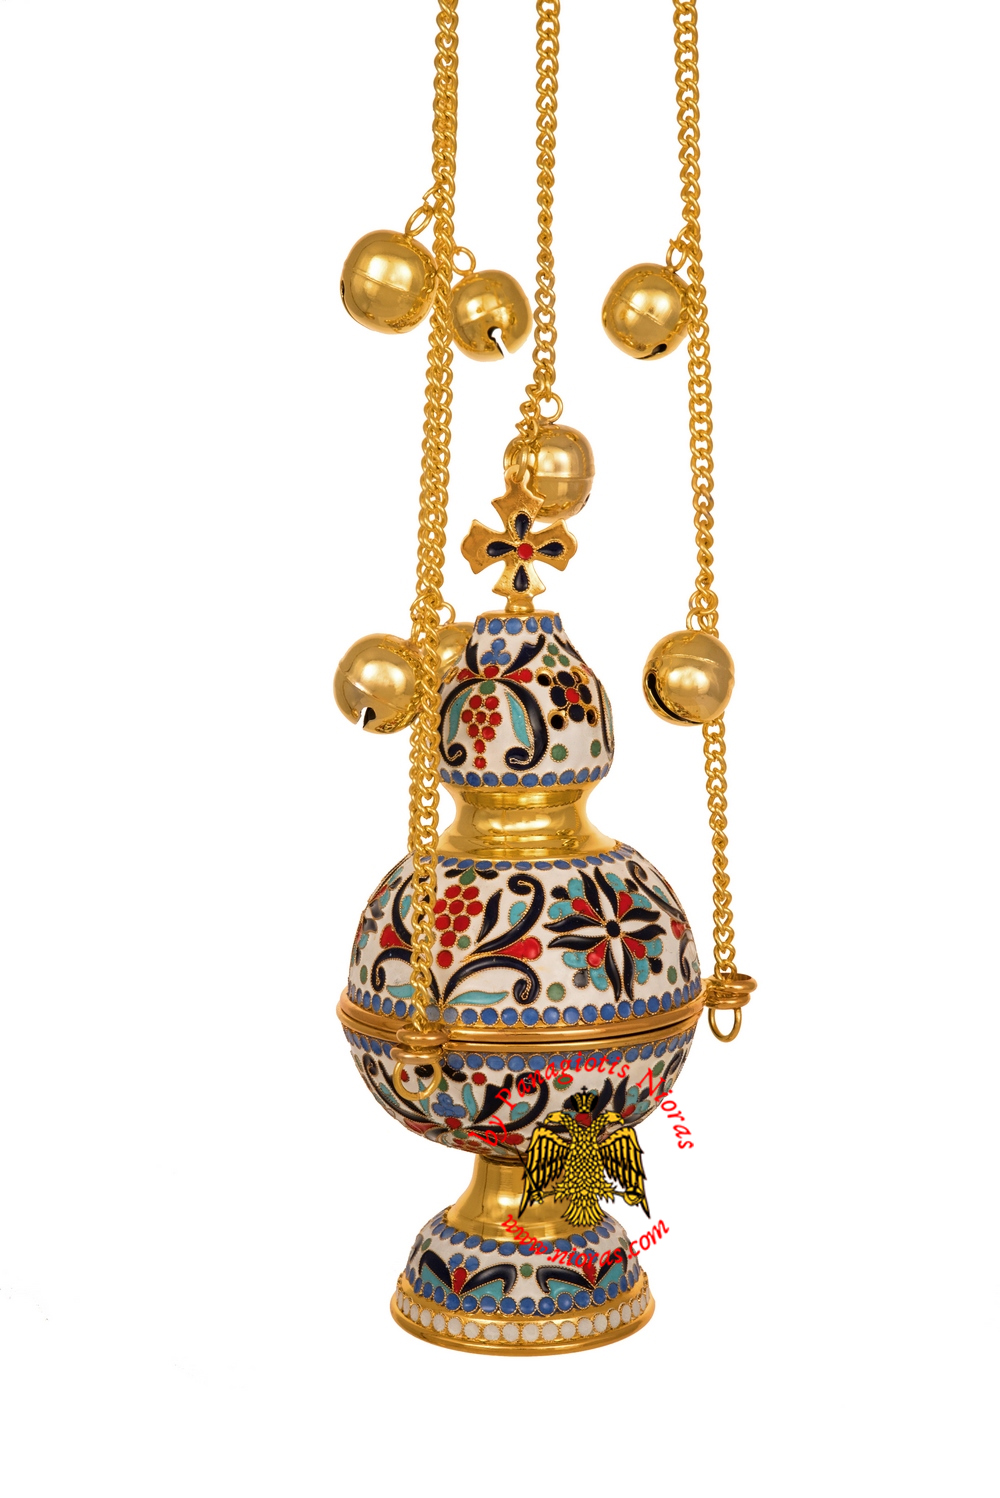 Ecclesiastical Orthodox Censer Russian Style A with Full Enamel Hand Made Gold Plated